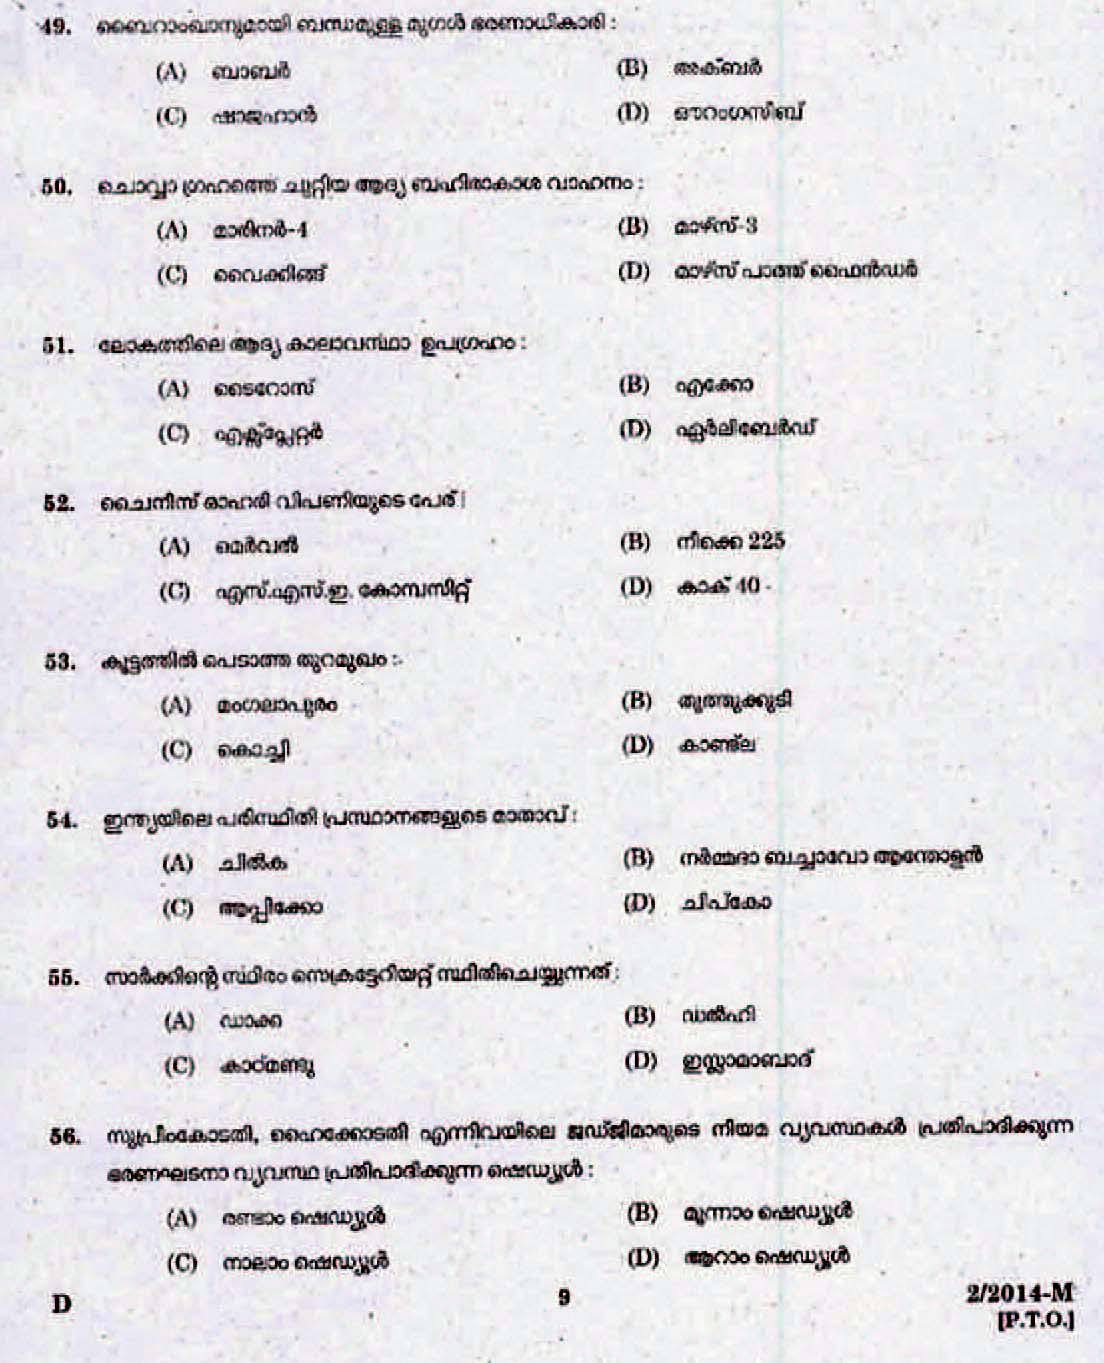 LD Clerk Question Paper Malayalam 2014 Paper Code 022014 M 6